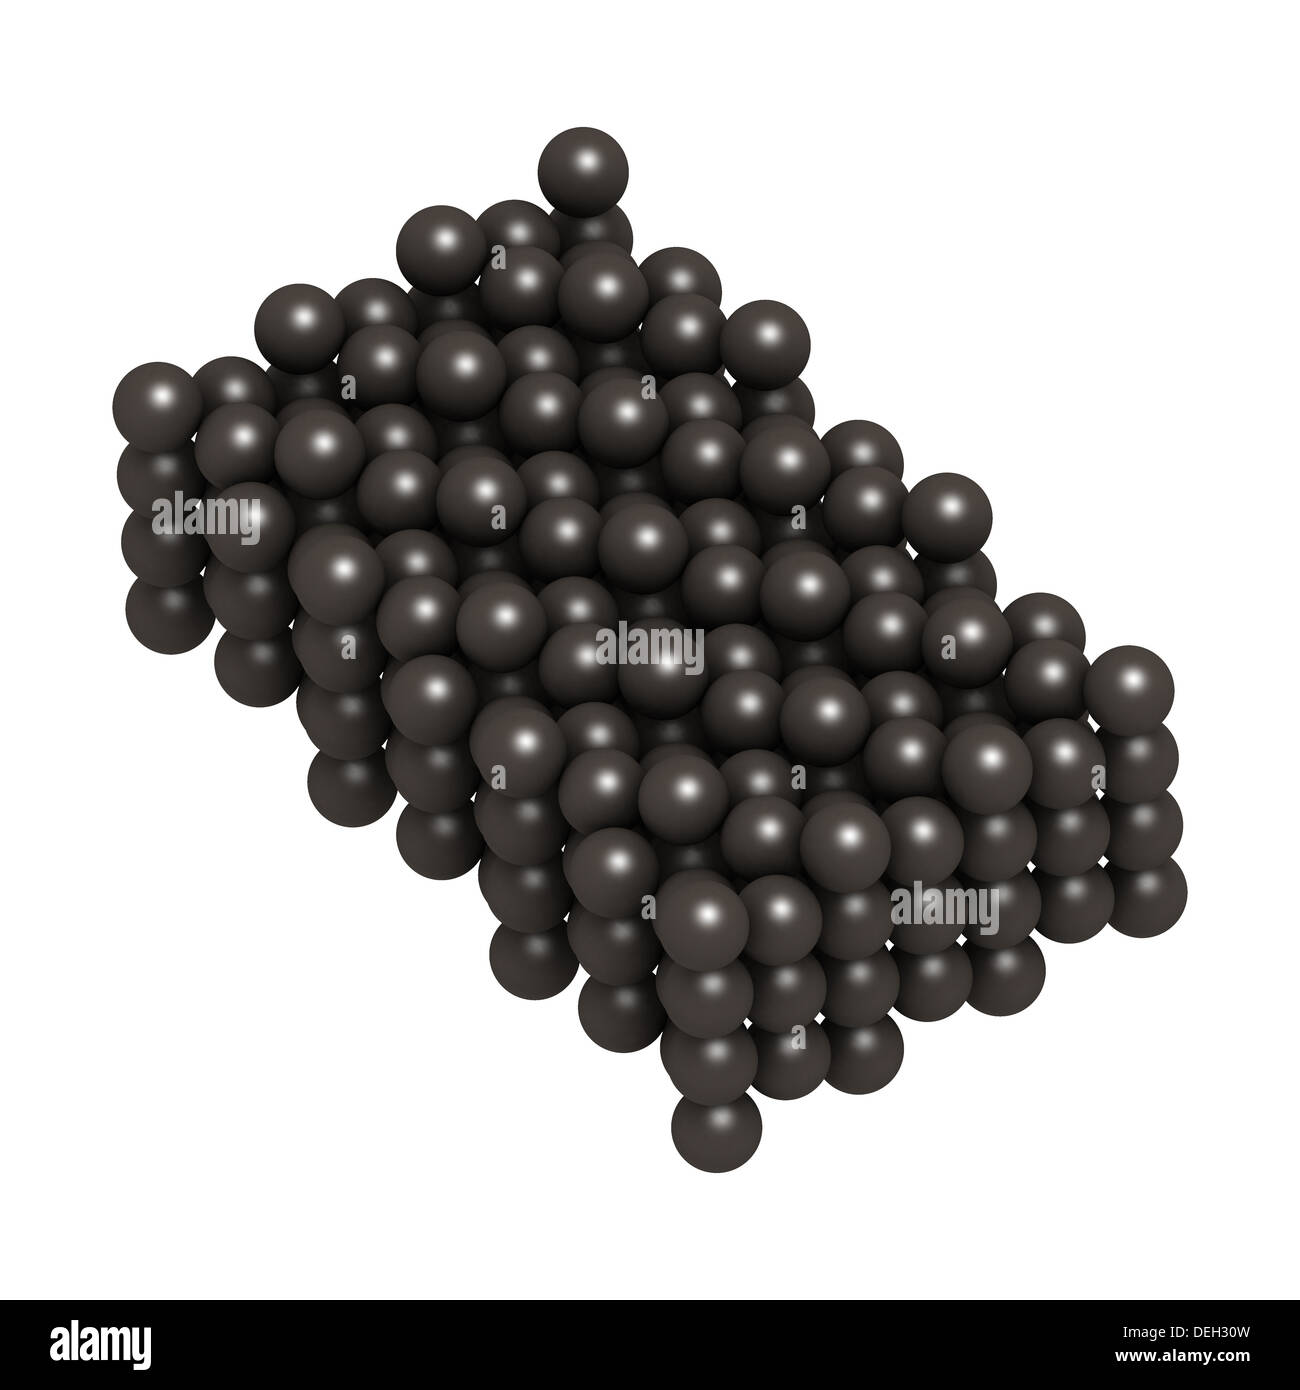 Plutonium (Pu) metal, crystal structure. Atoms are represented as color-coded spheres. Stock Photo